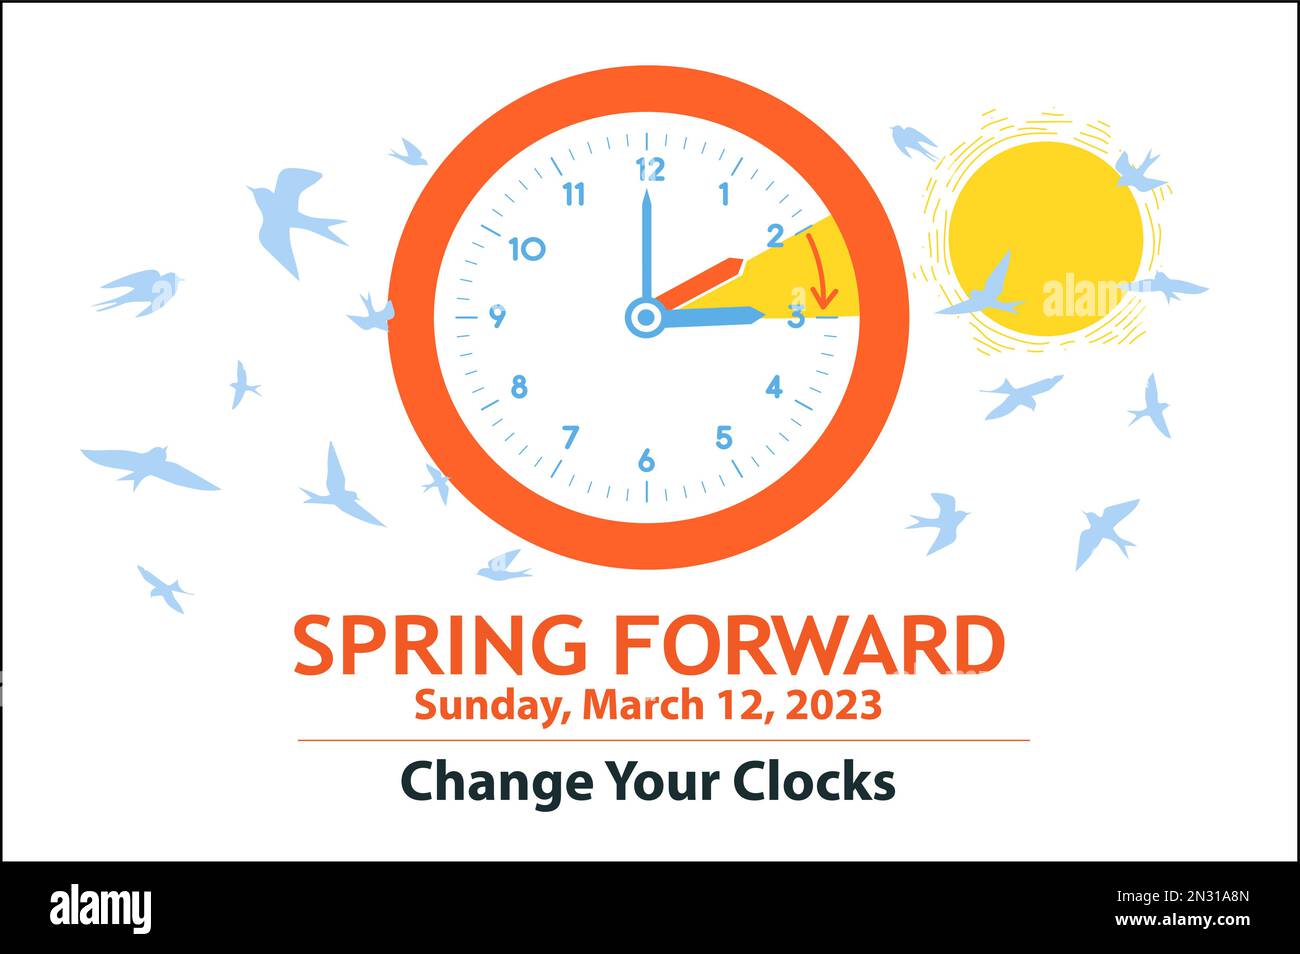 What Is Daylight Saving Time 2023, and When Do We Change the Clocks?